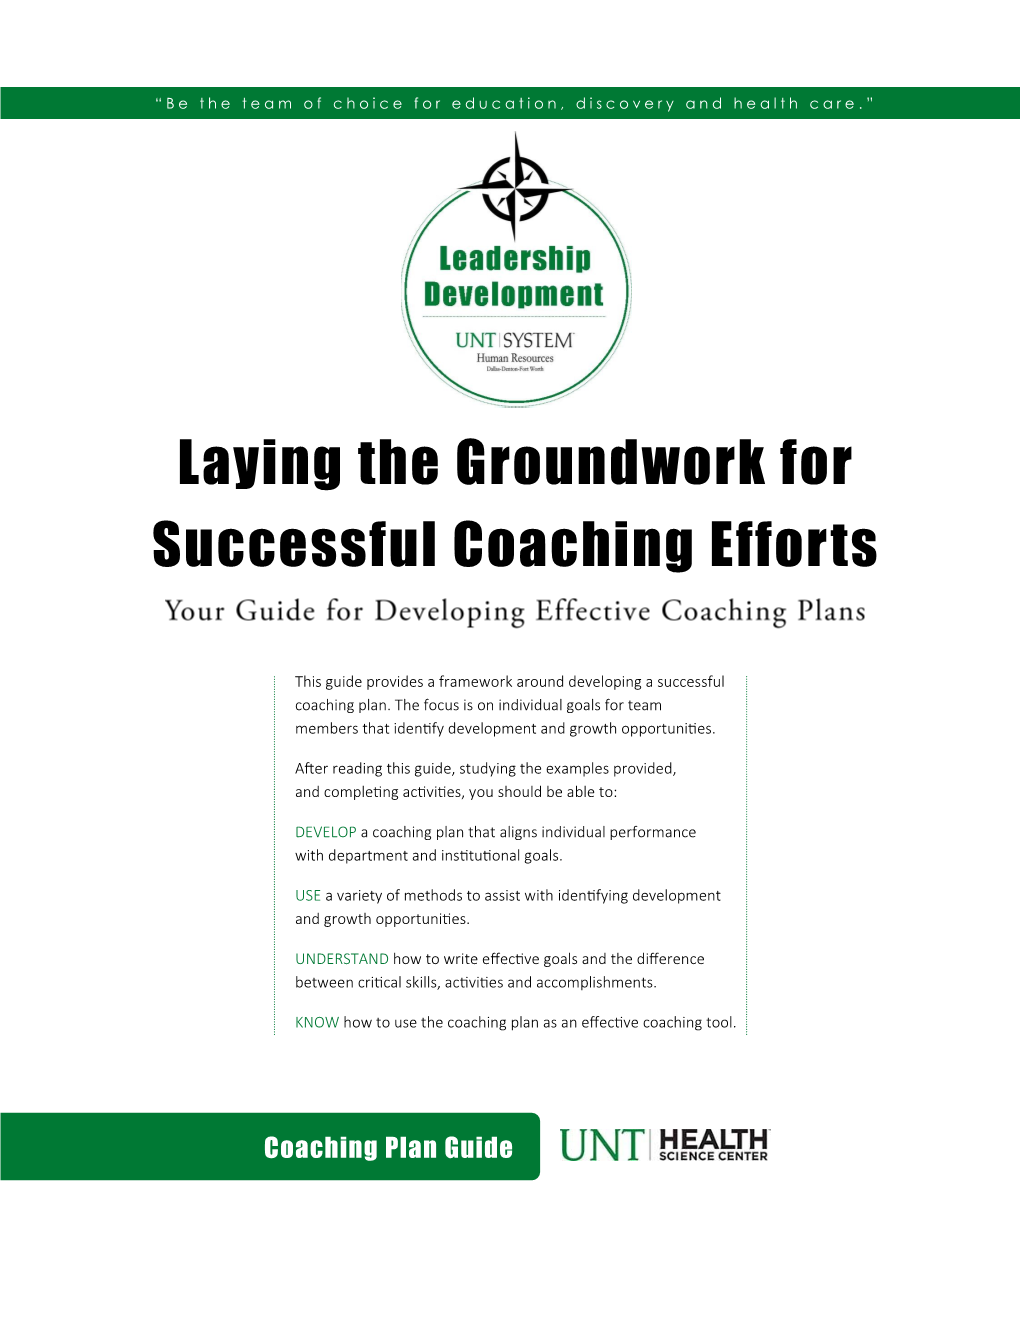 Laying the Groundwork for Successful Coaching Efforts